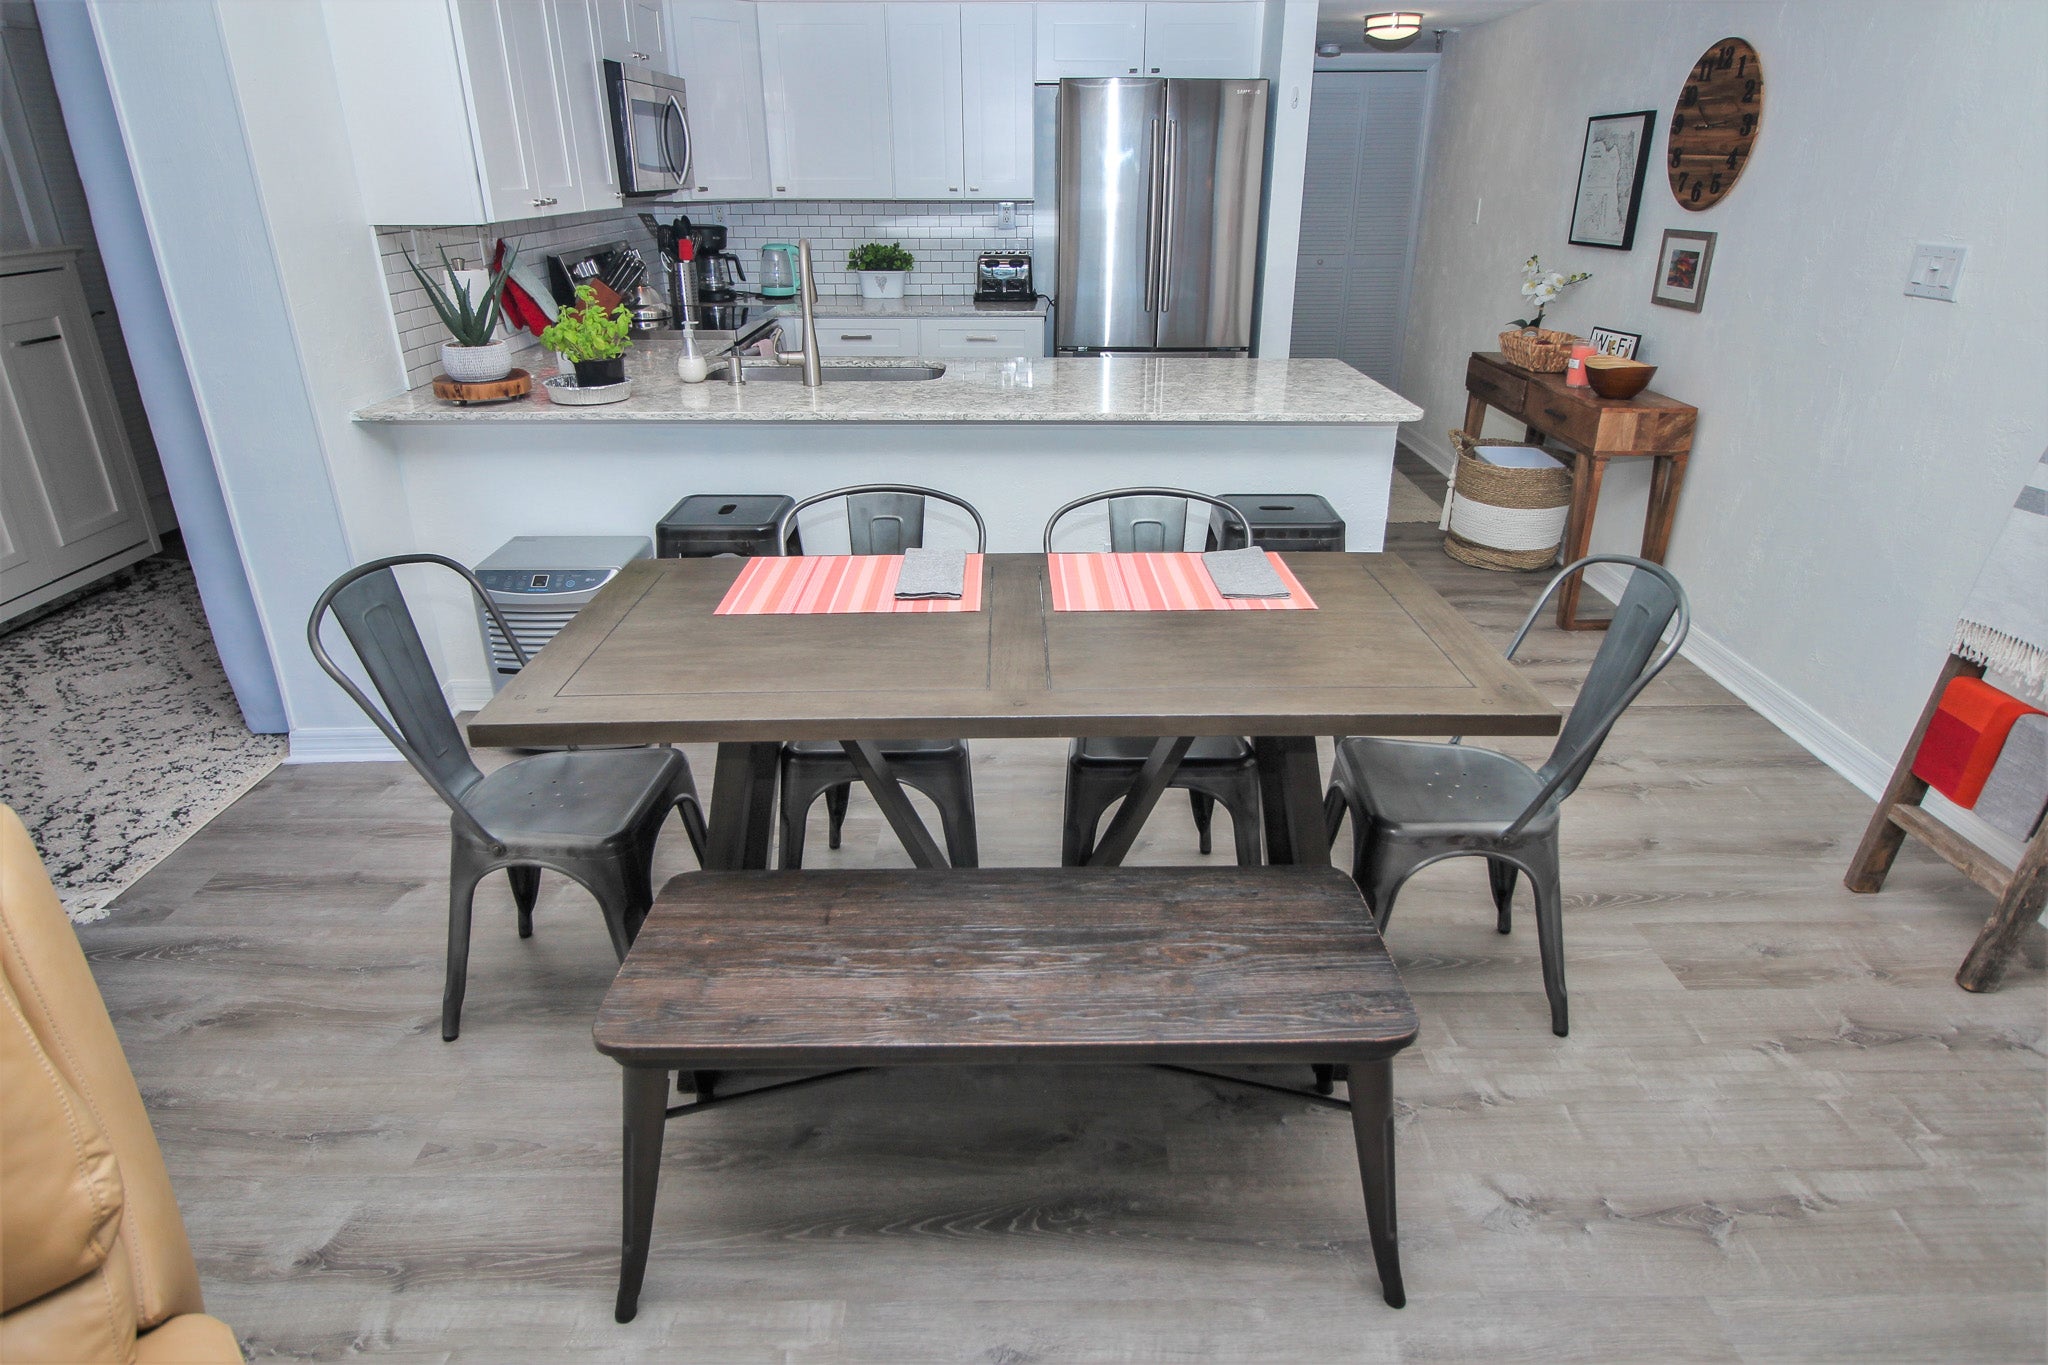 Dining table seats 6